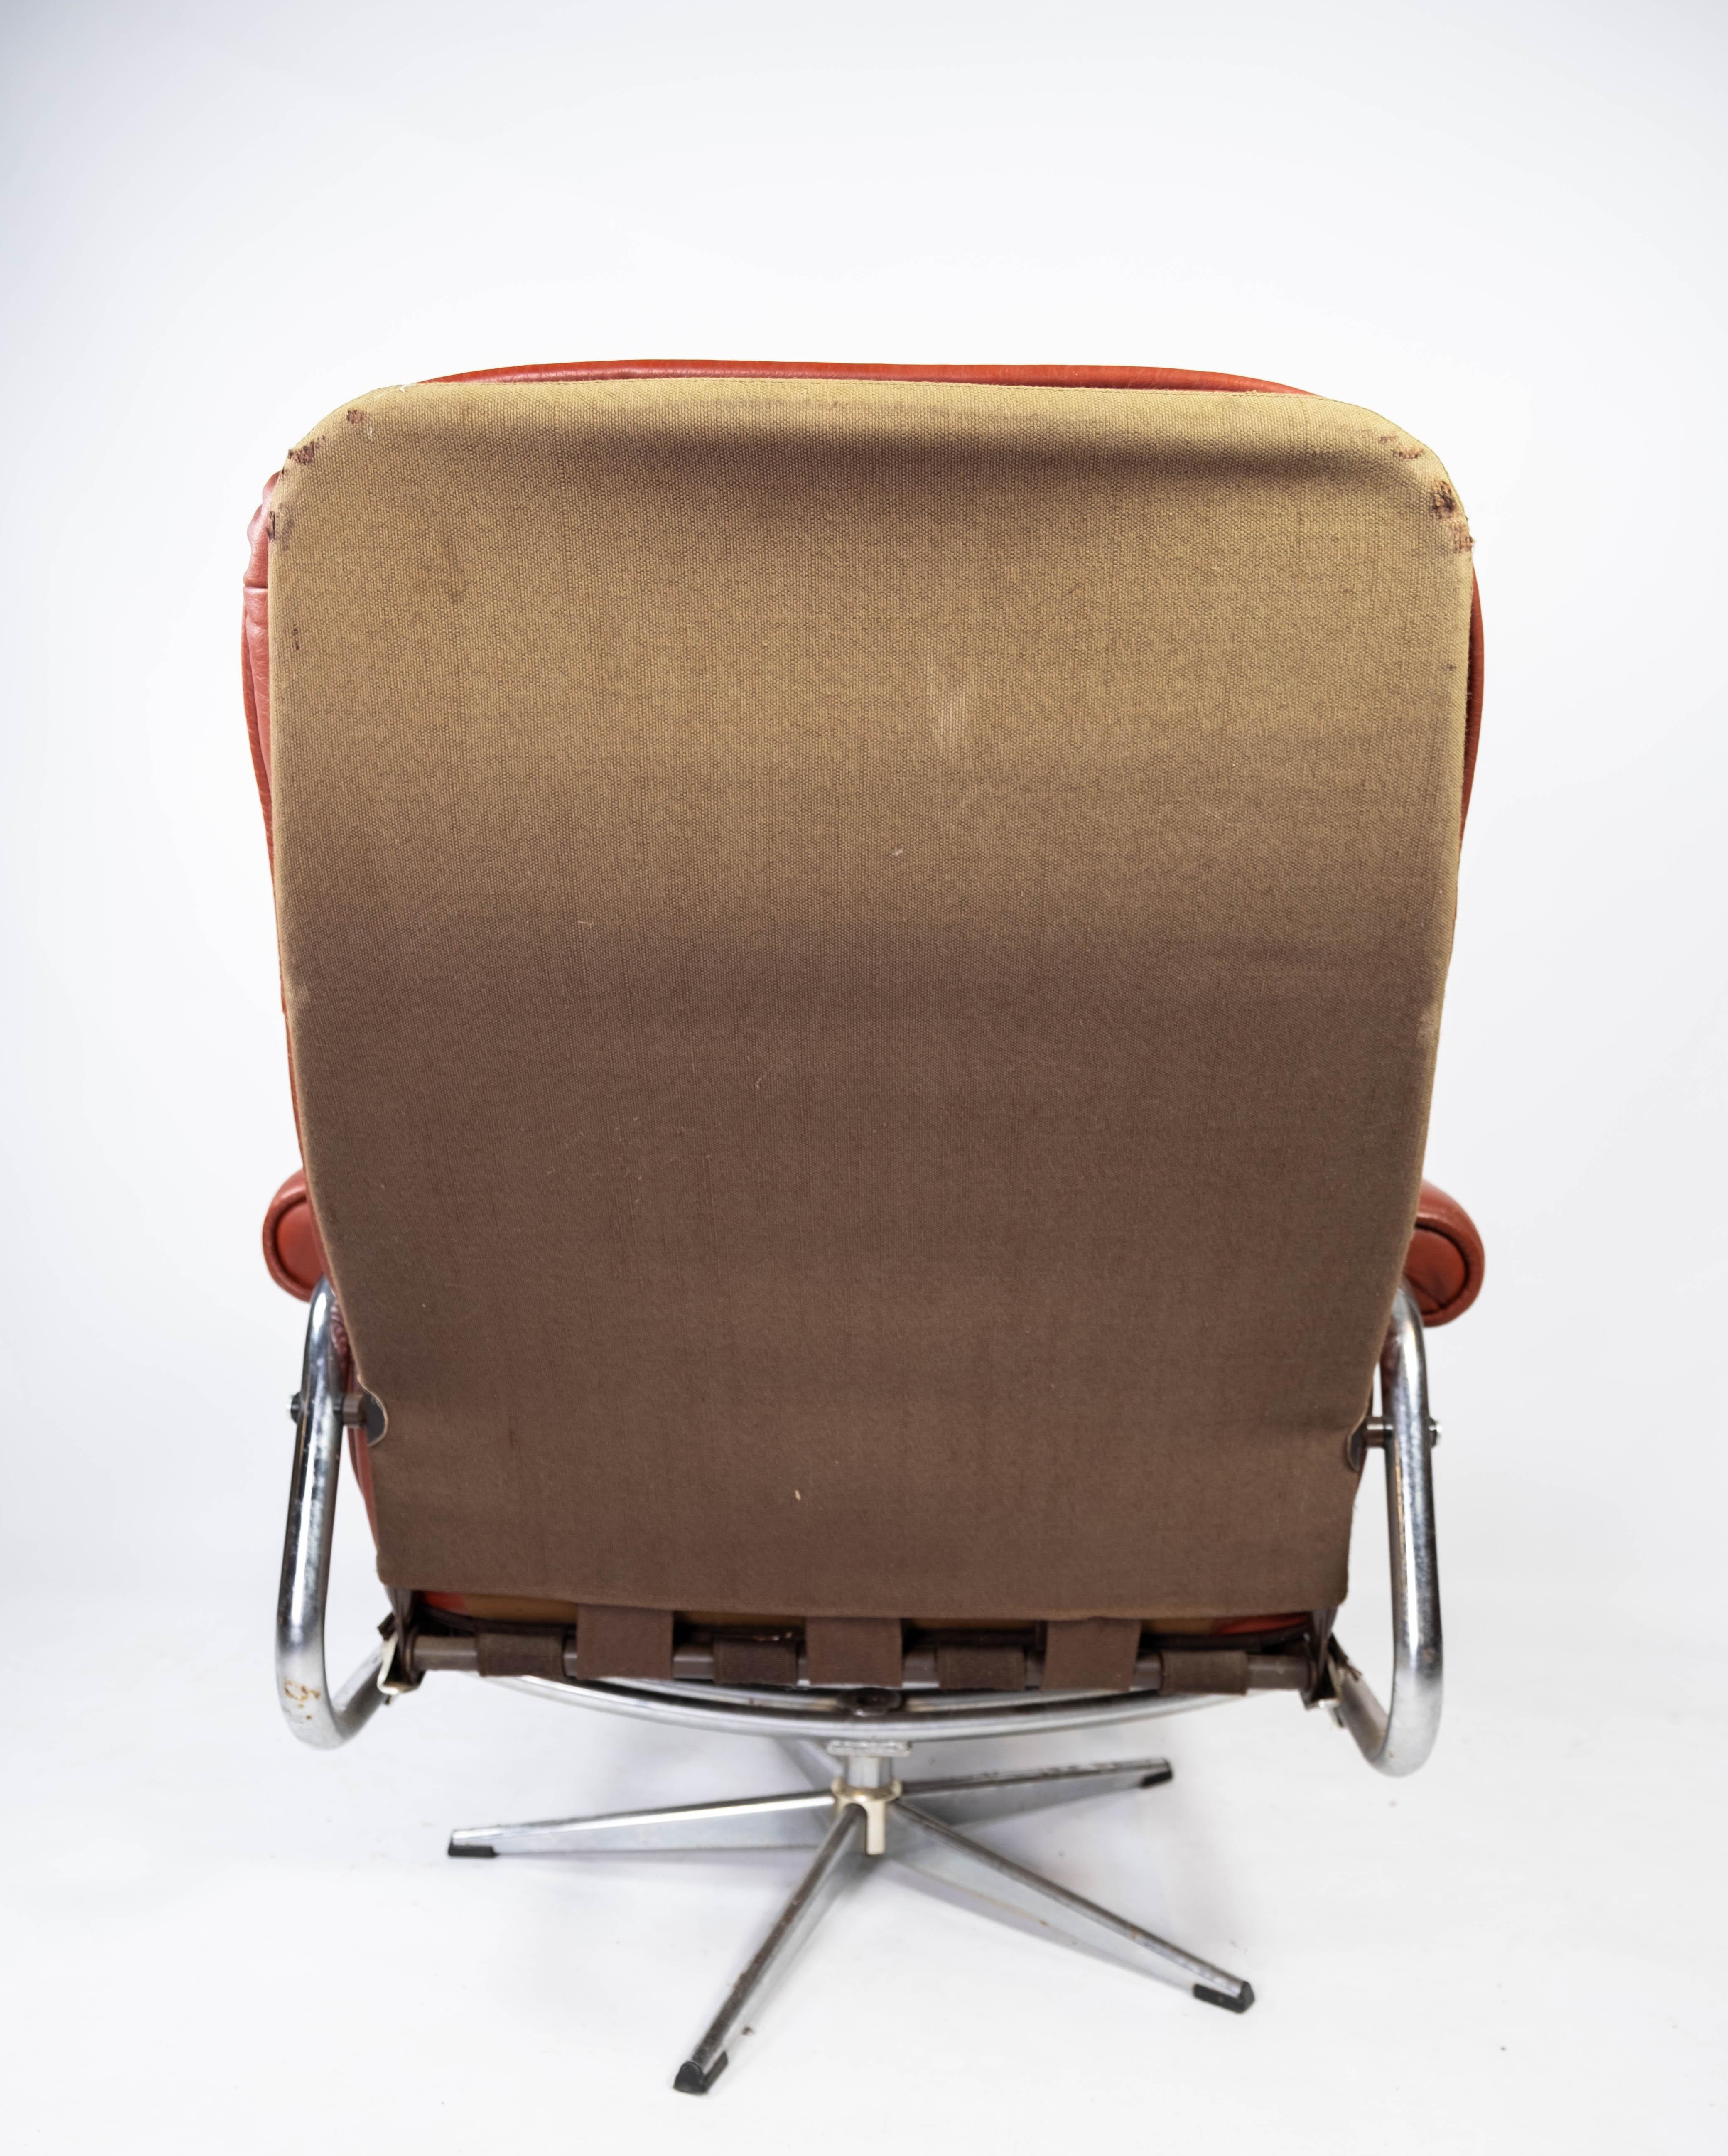 Armchair Upholstered with Red Leather and Frame of Metal, of Danish Design, 1960 For Sale 6